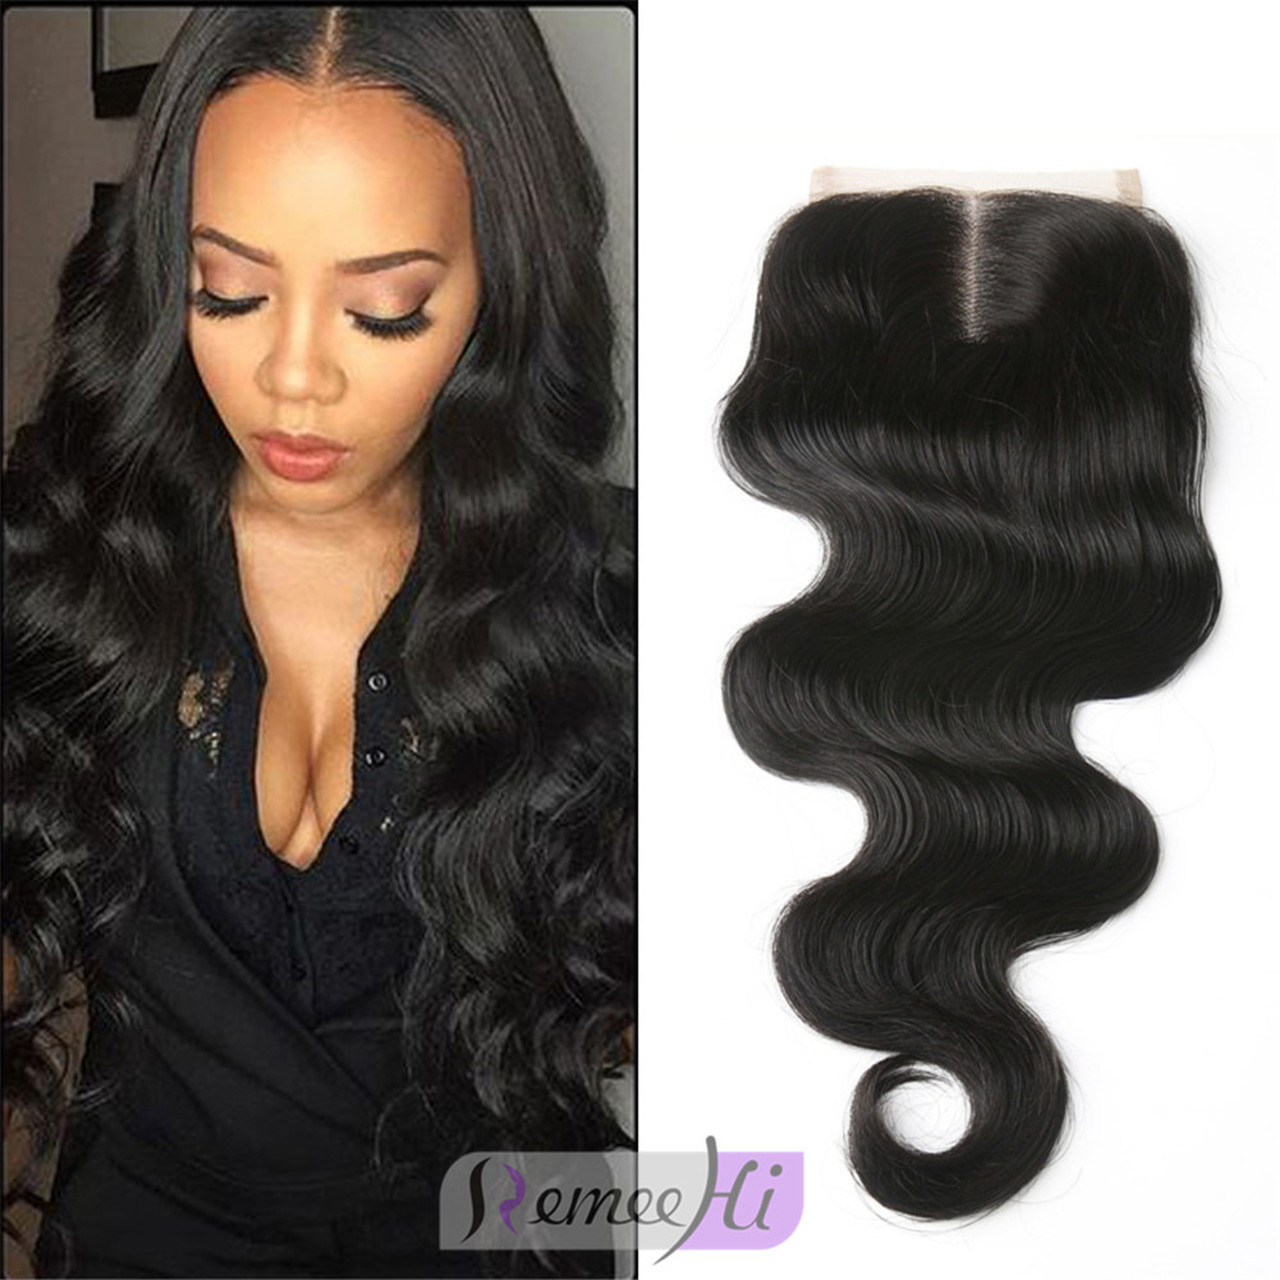 body wave hair with closure